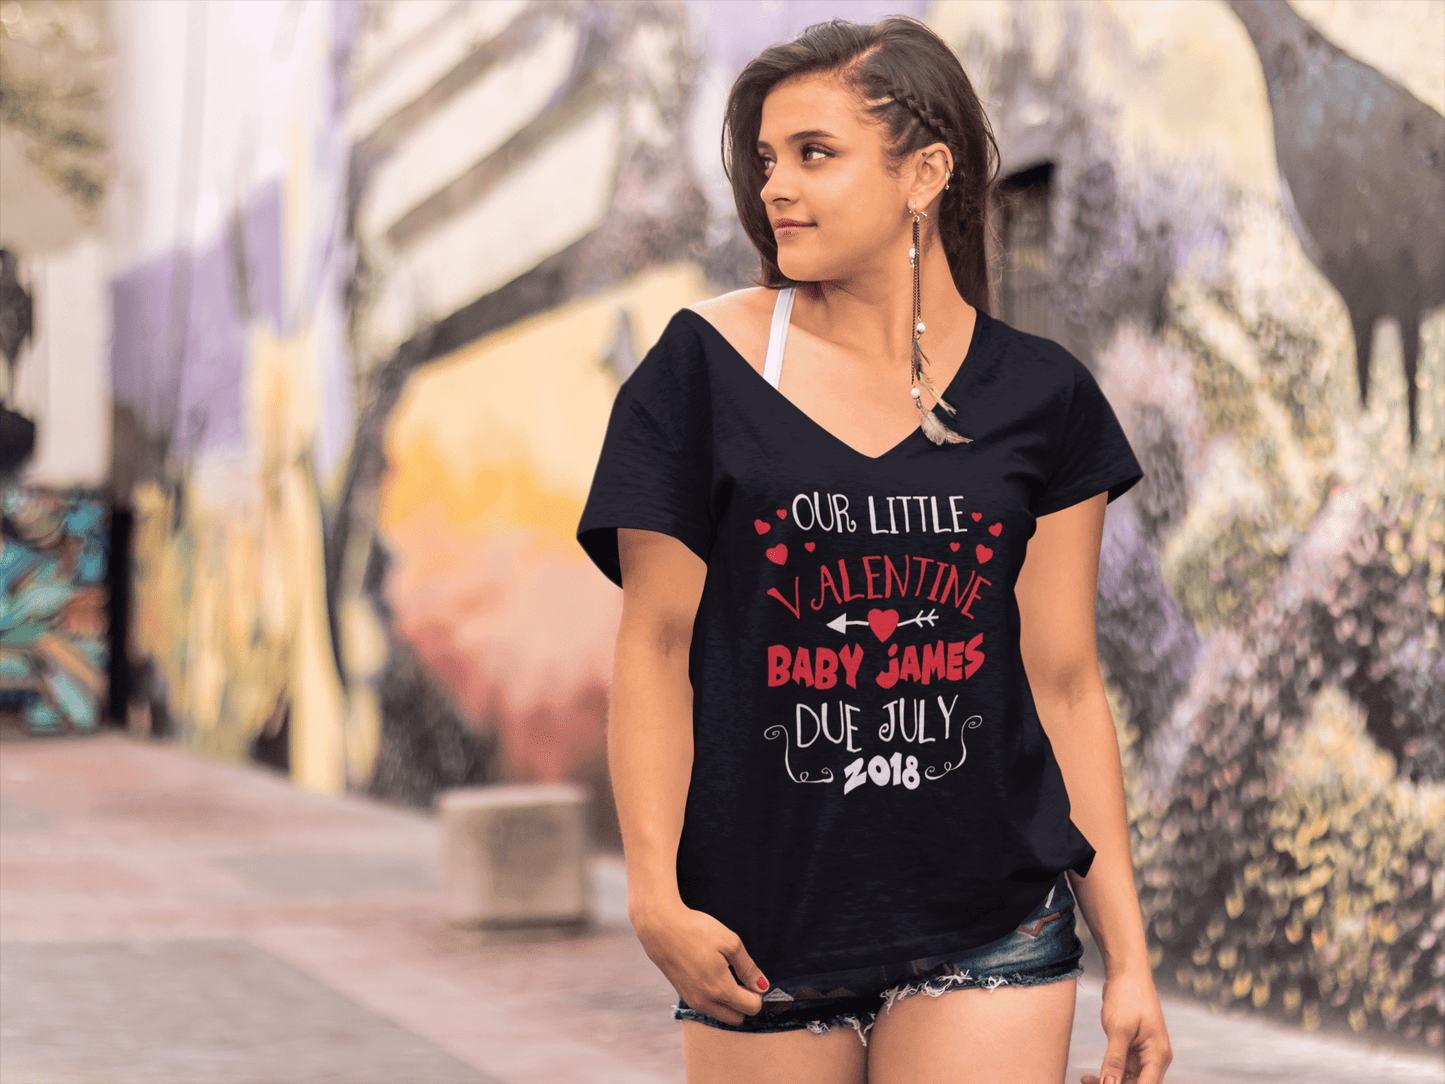 ULTRABASIC Women's T-Shirt Our Little Valentine - Valentine's Day Short Sleeve Graphic Tees Tops